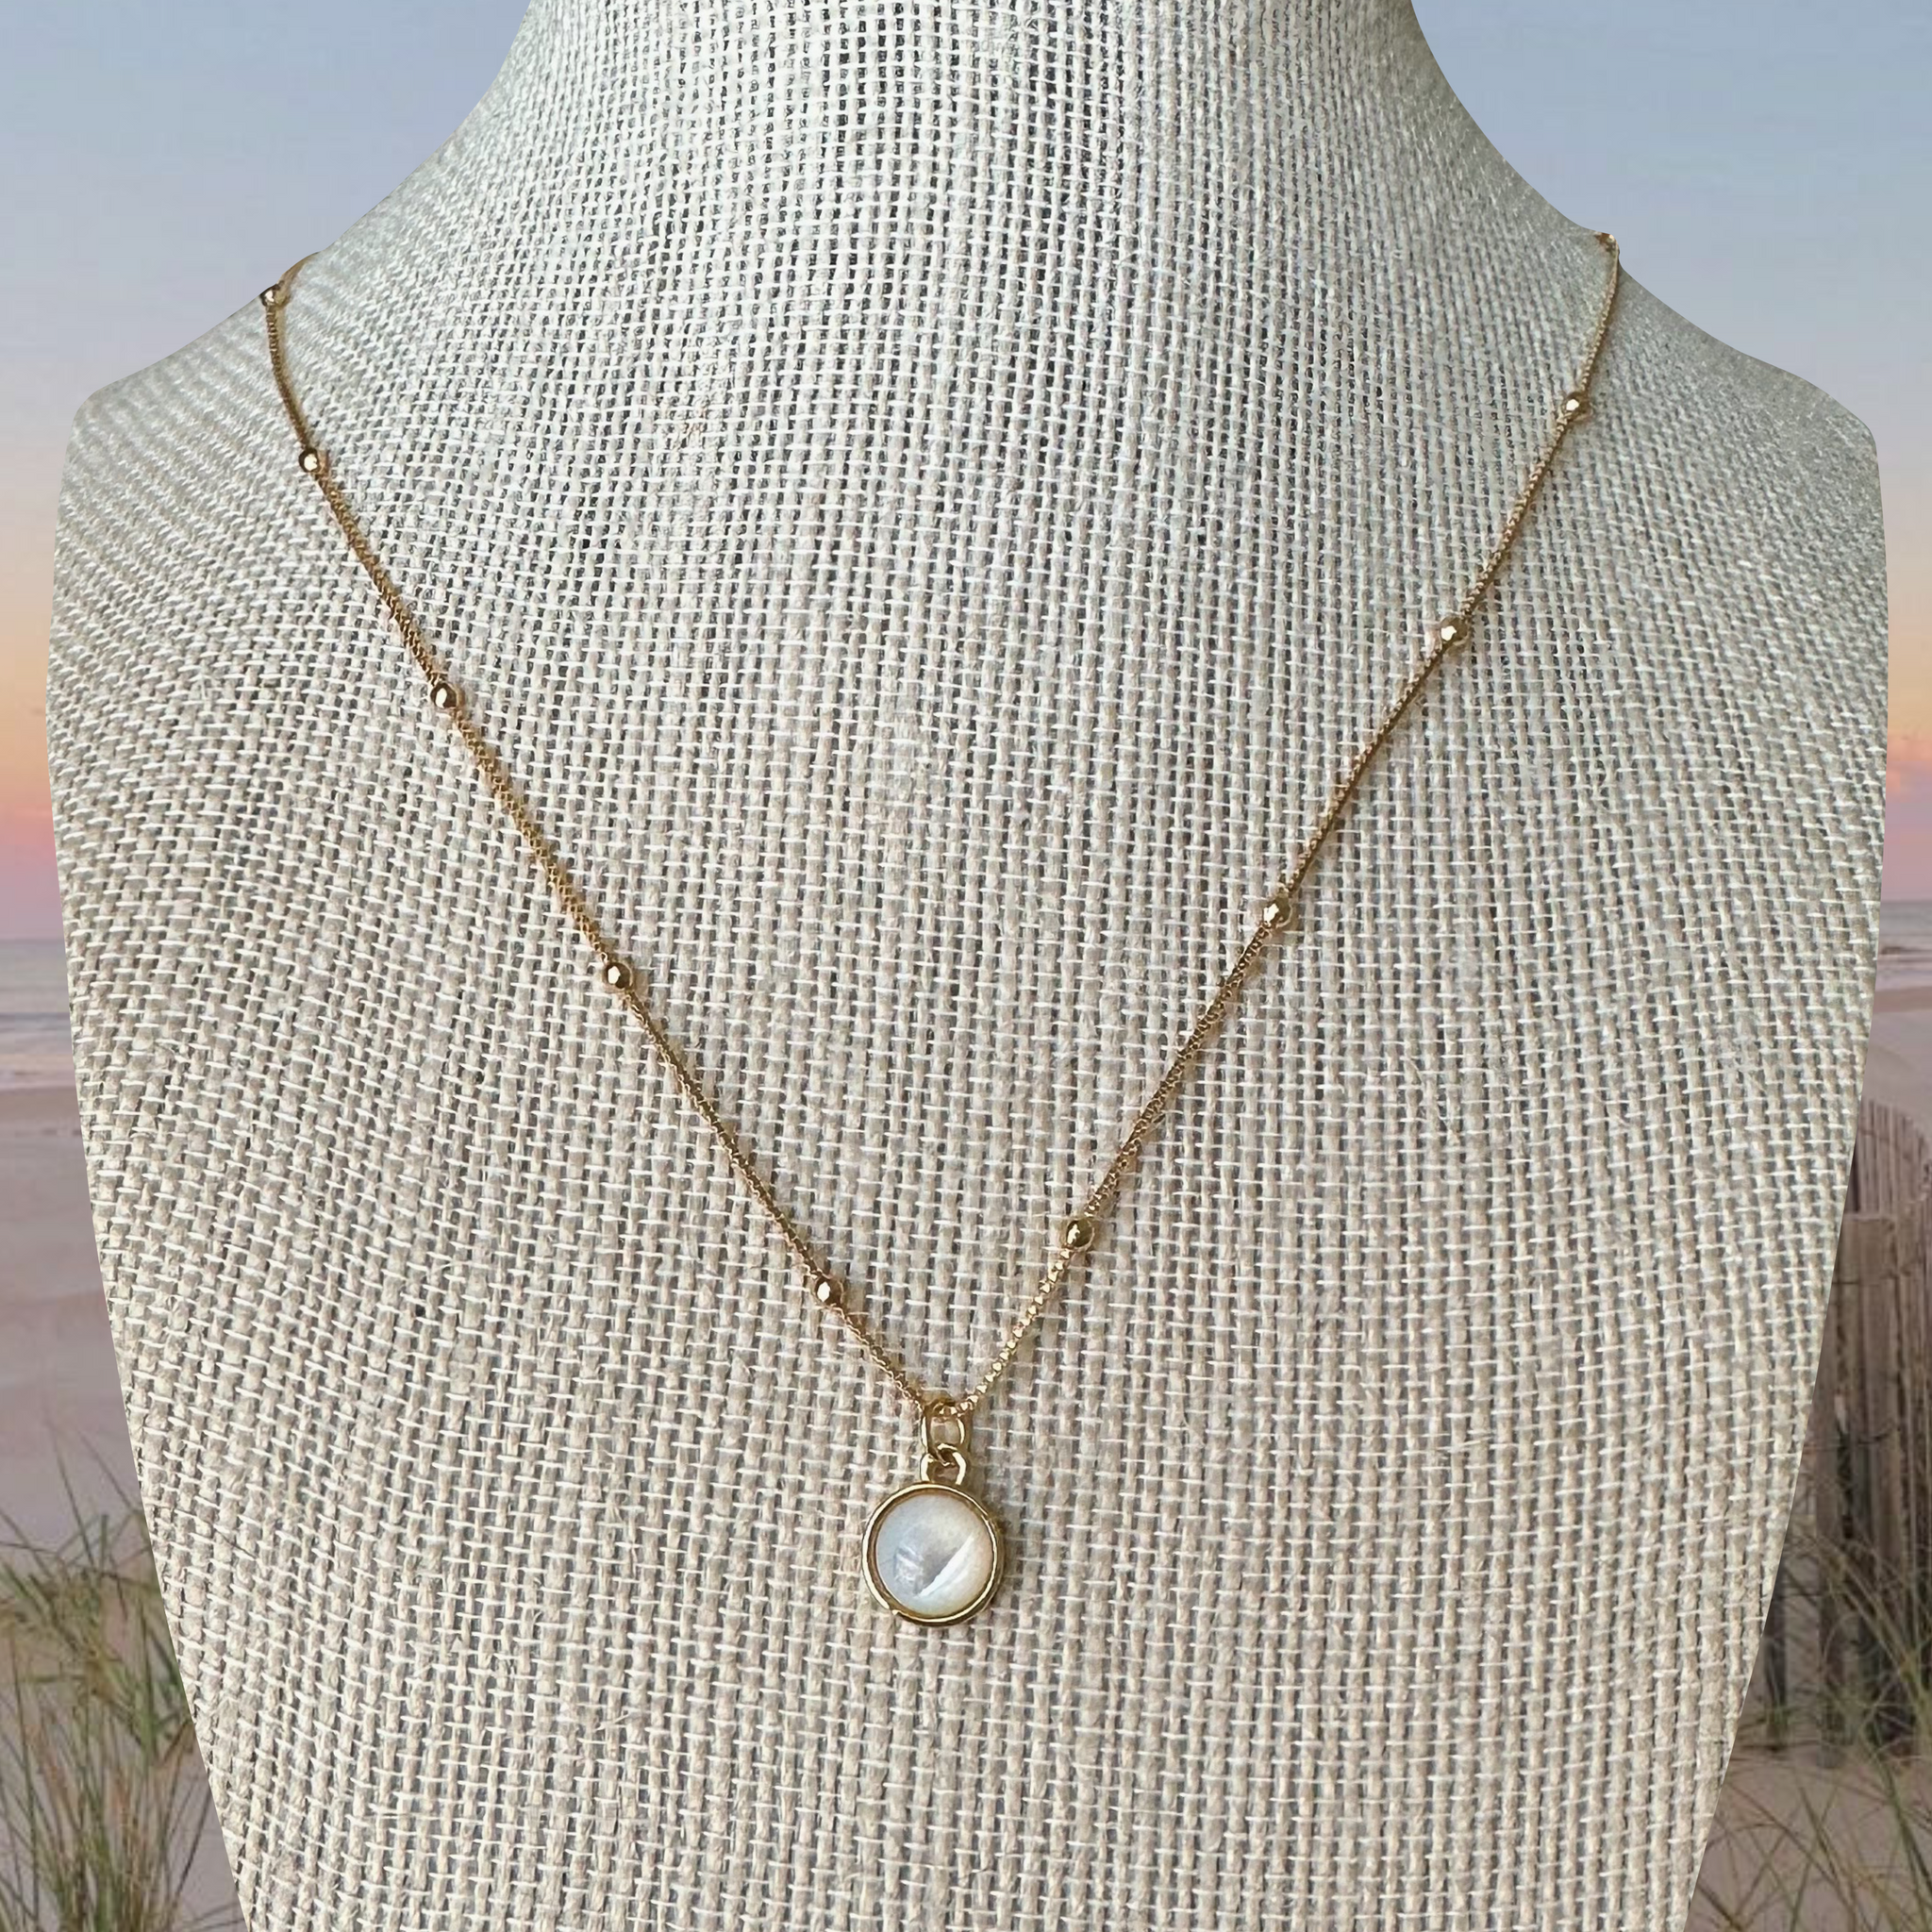 PEARL & BEADS NECKLACE